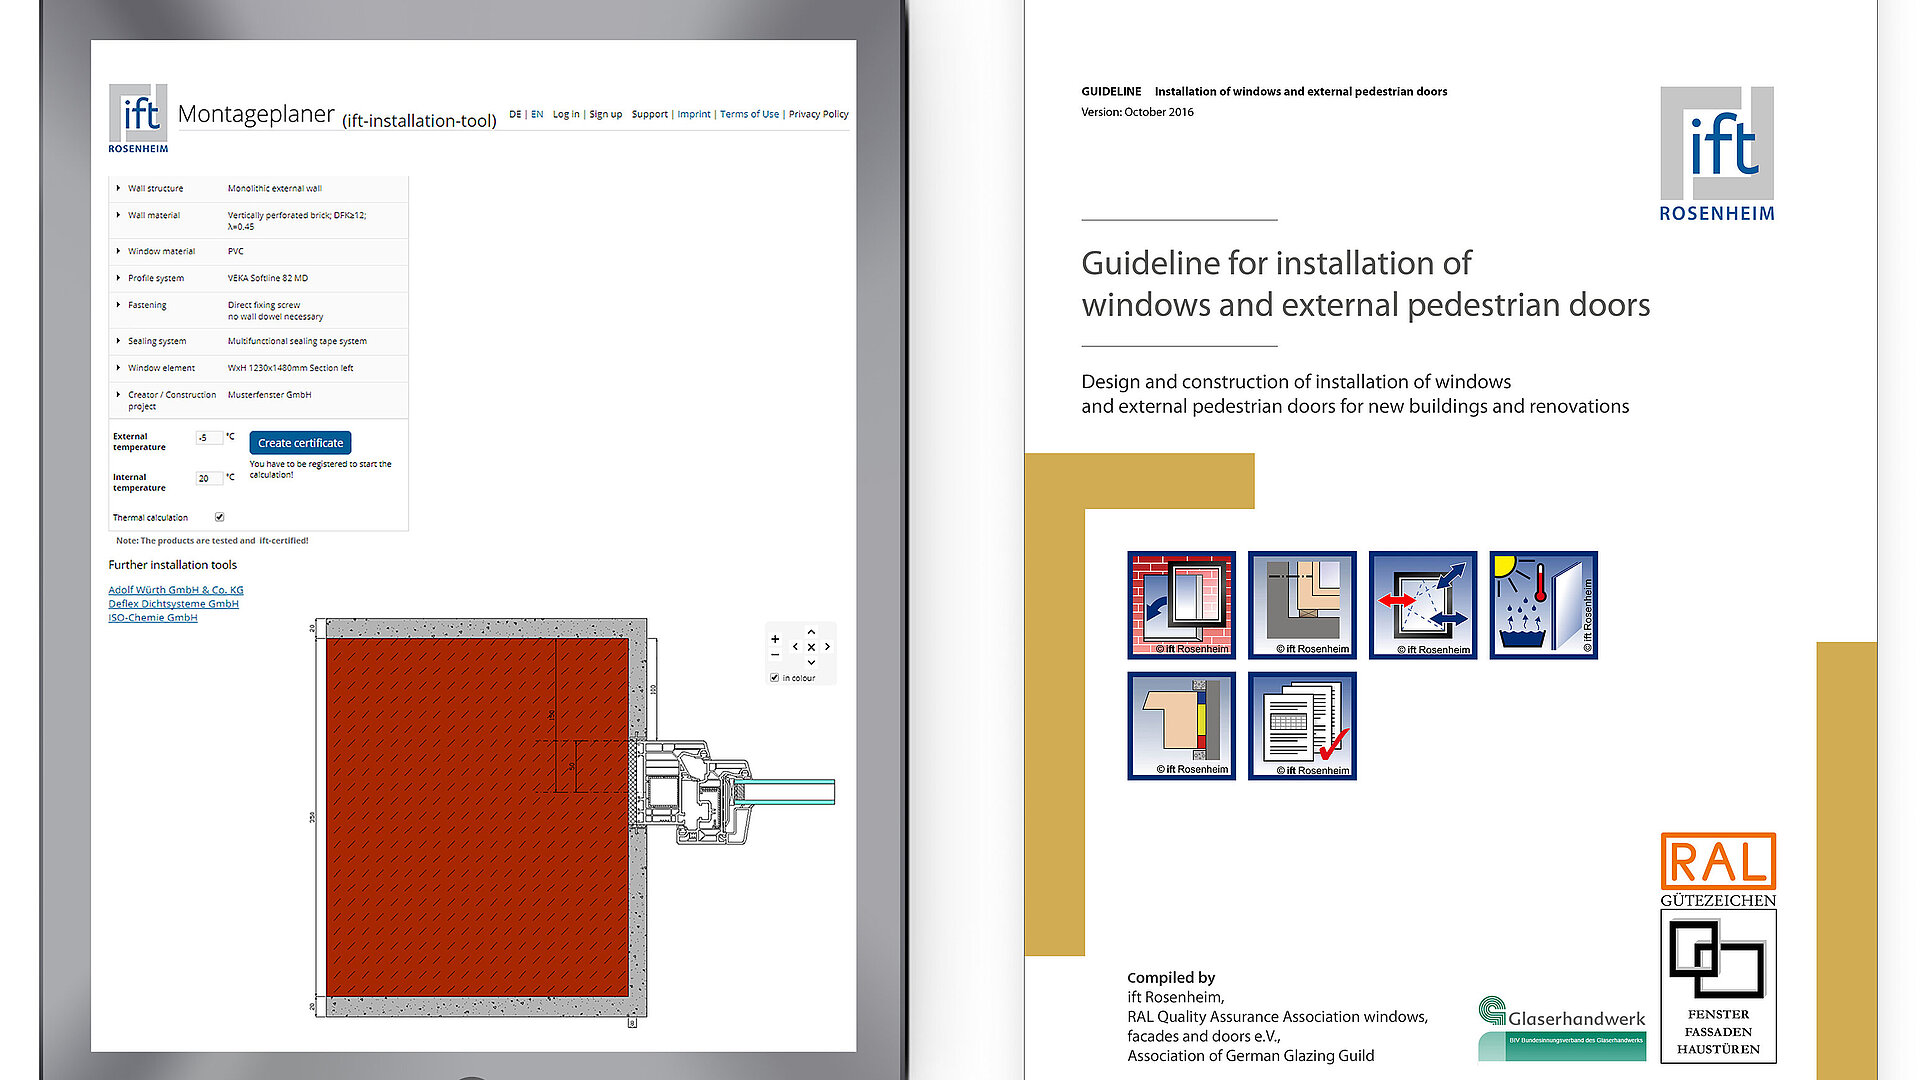 ift assembly planner in english on tablet and cover of assembly guide in english